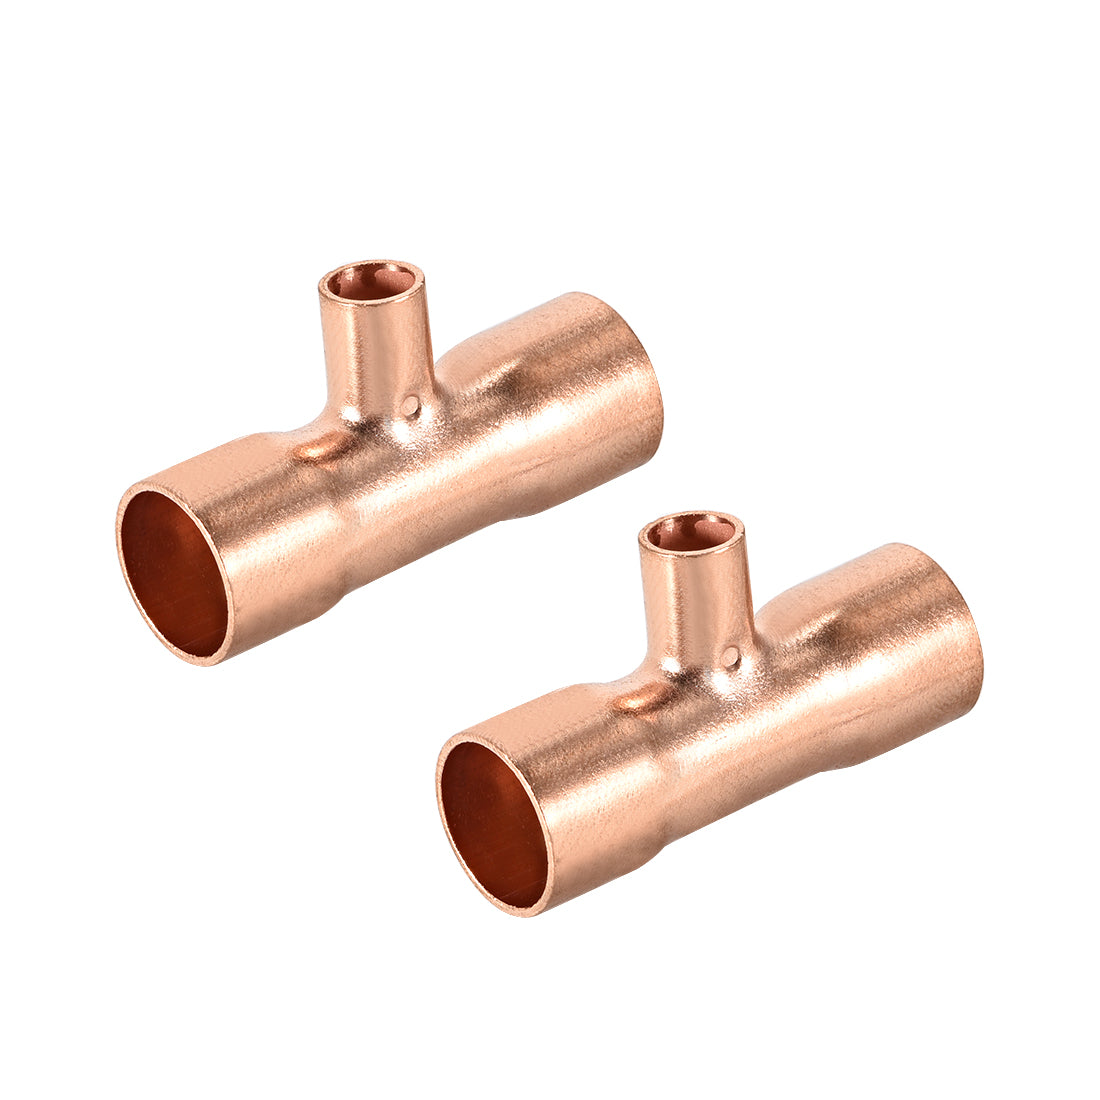 uxcell Uxcell 3/8-inch x 1/4-inch x 3/8-inch Copper Reducing Tee Copper Pressure Pipe Fitting Conector  for Plumbing Supply and Refrigeration 2pcs